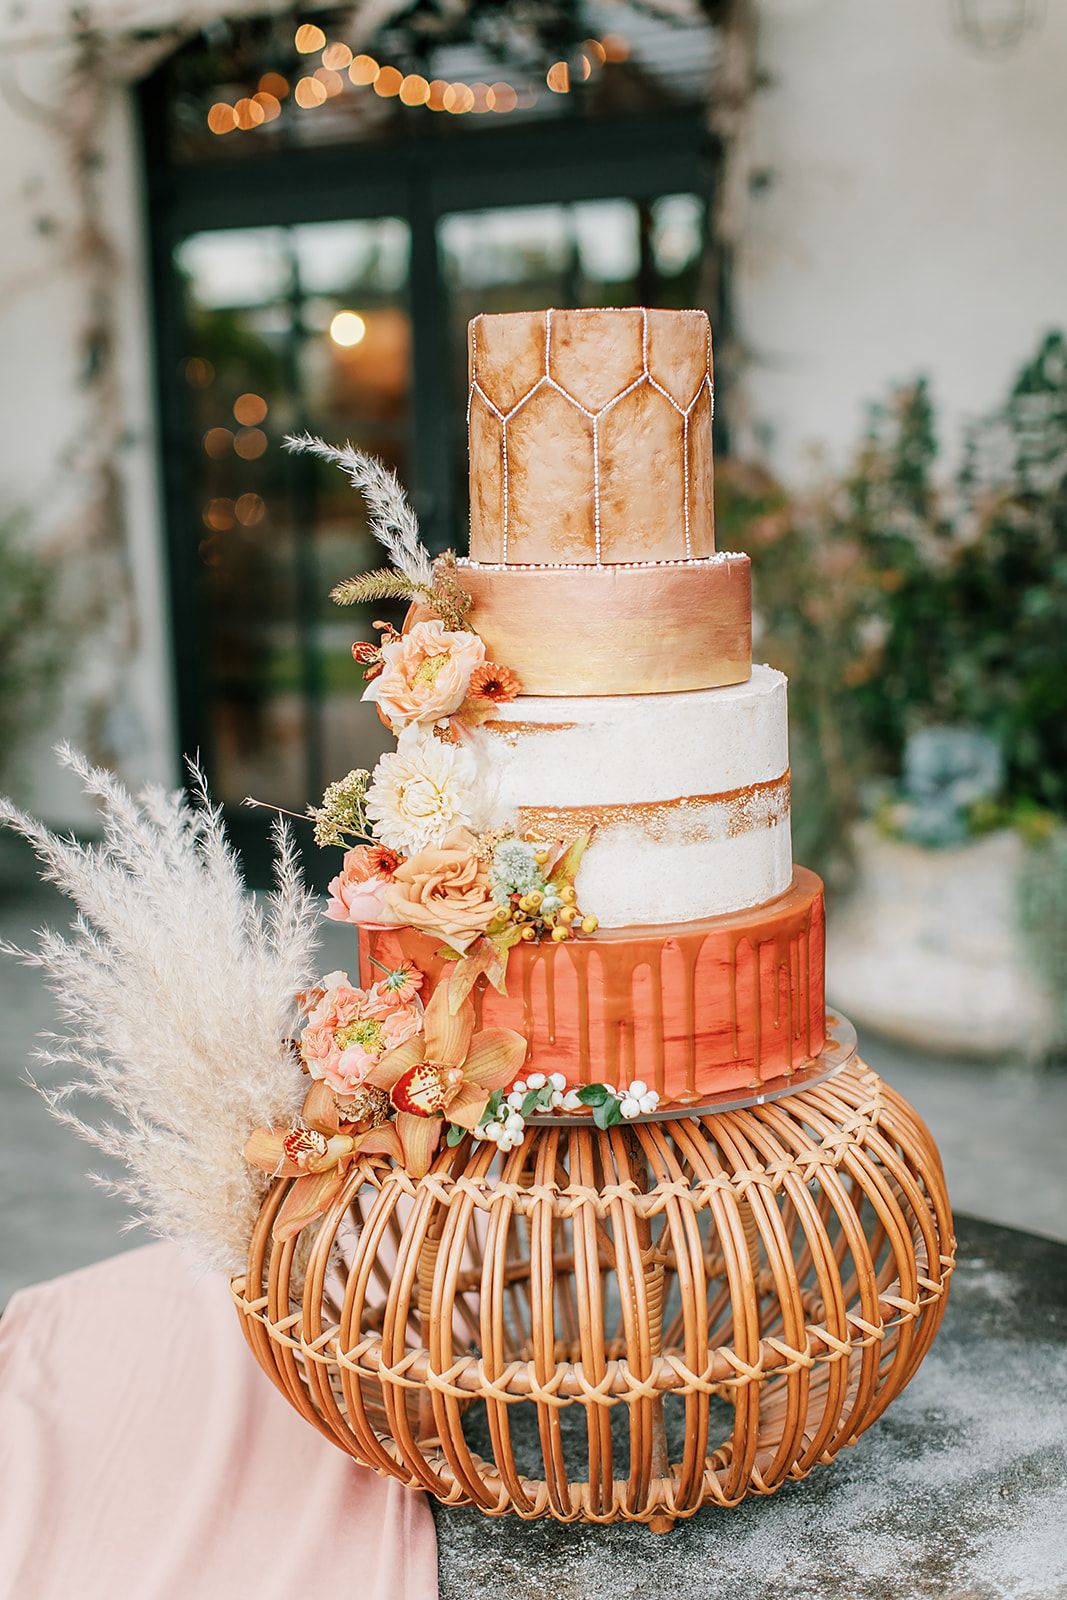 12 Fall Cake Ideas For A Special Occasion - Find Your Cake Inspiration